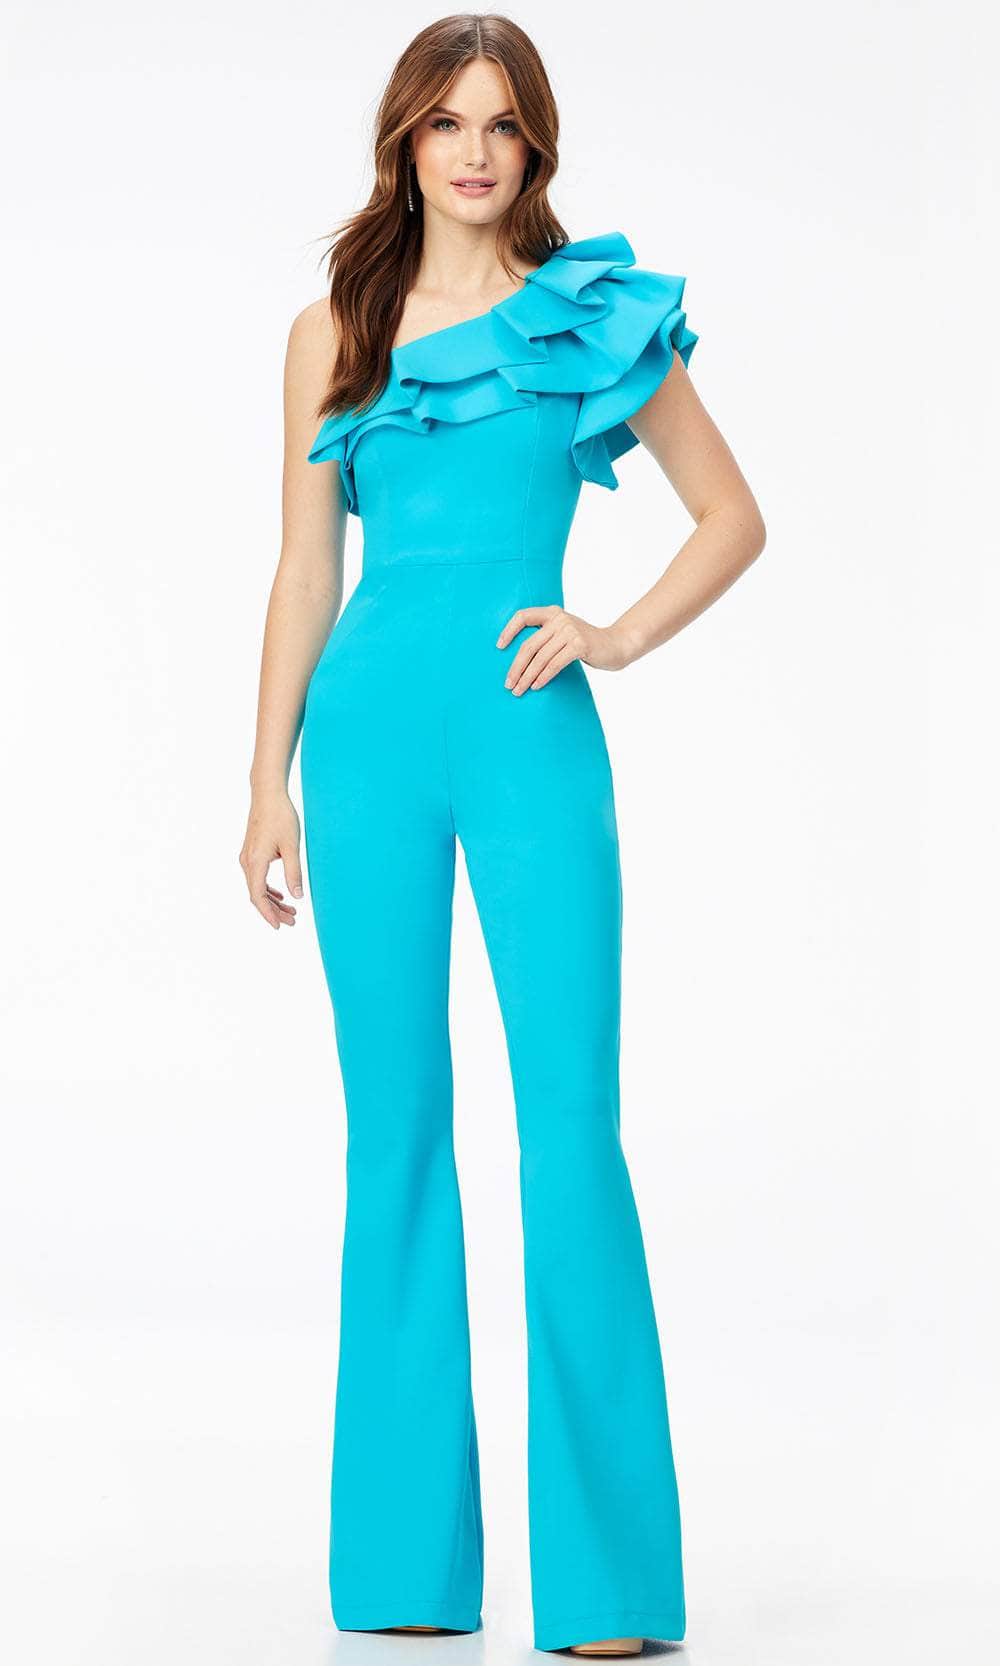 Ashley Lauren 11222 - Ruffled Asymmetric Jumpsuit Special Occasion Dress 00 / Turquoise